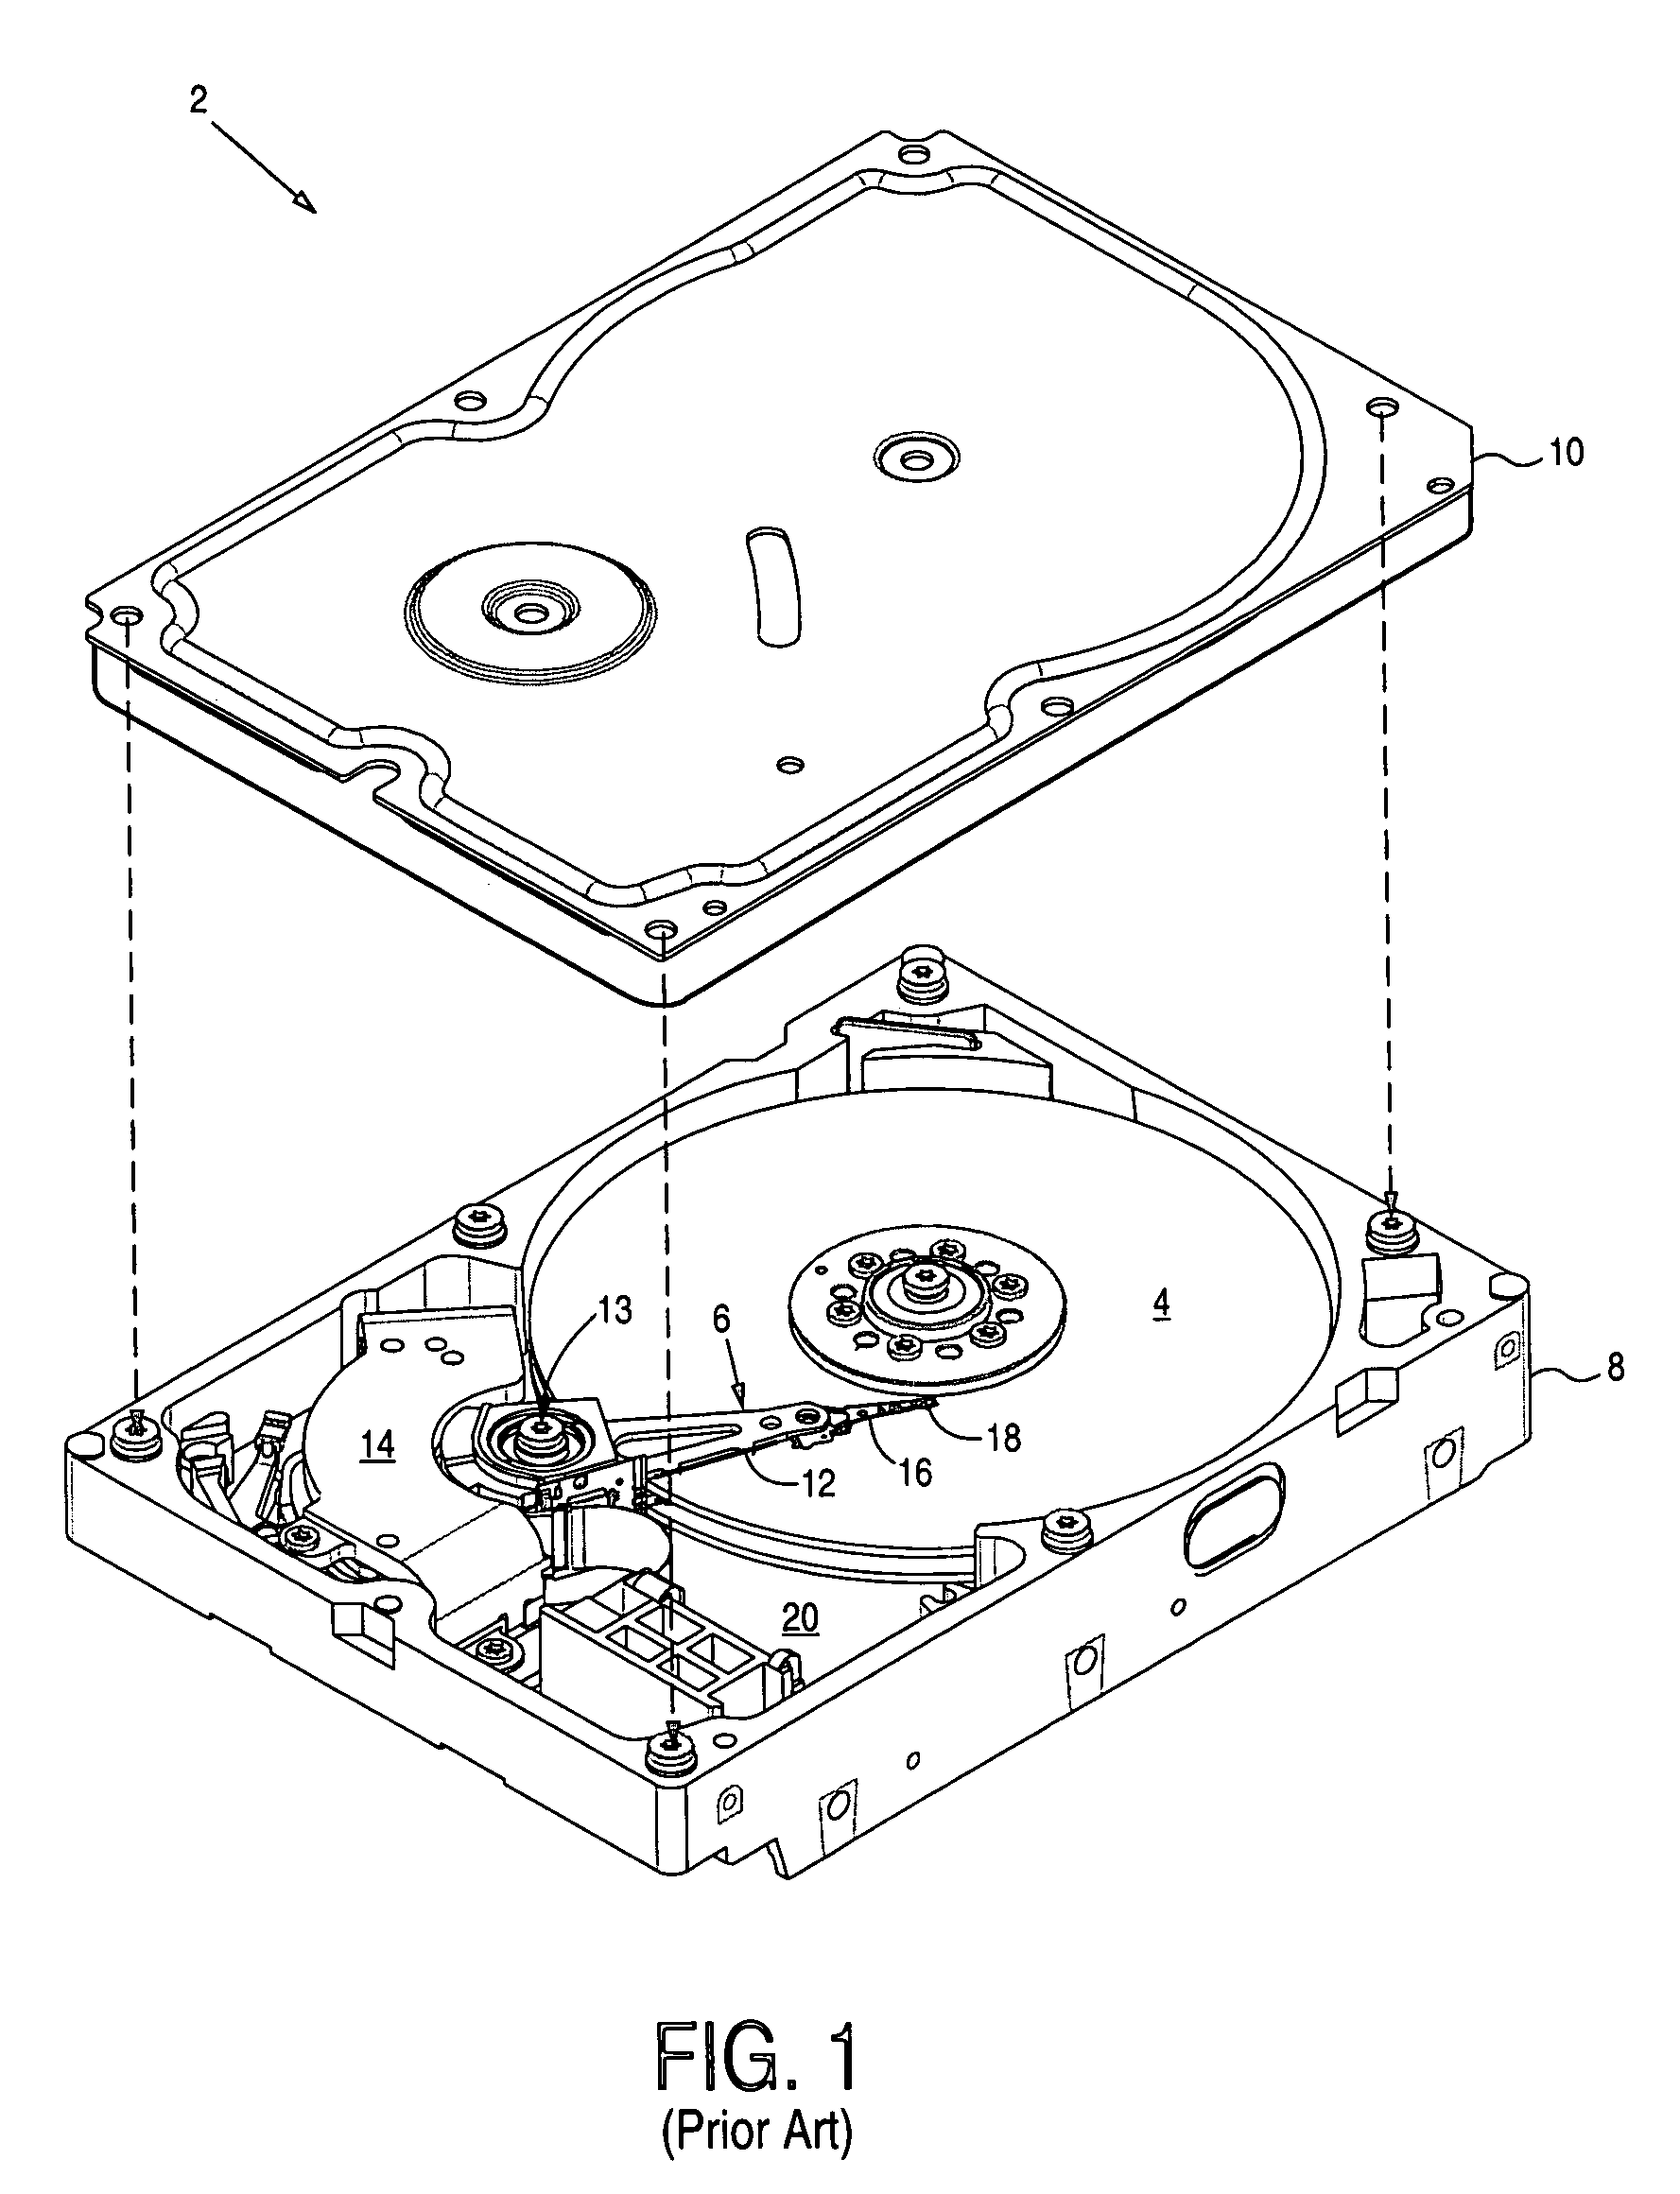 Method of assembling a disk drive including actuating a shipping comb to bend a suspension vertically to facilitate a merge tool